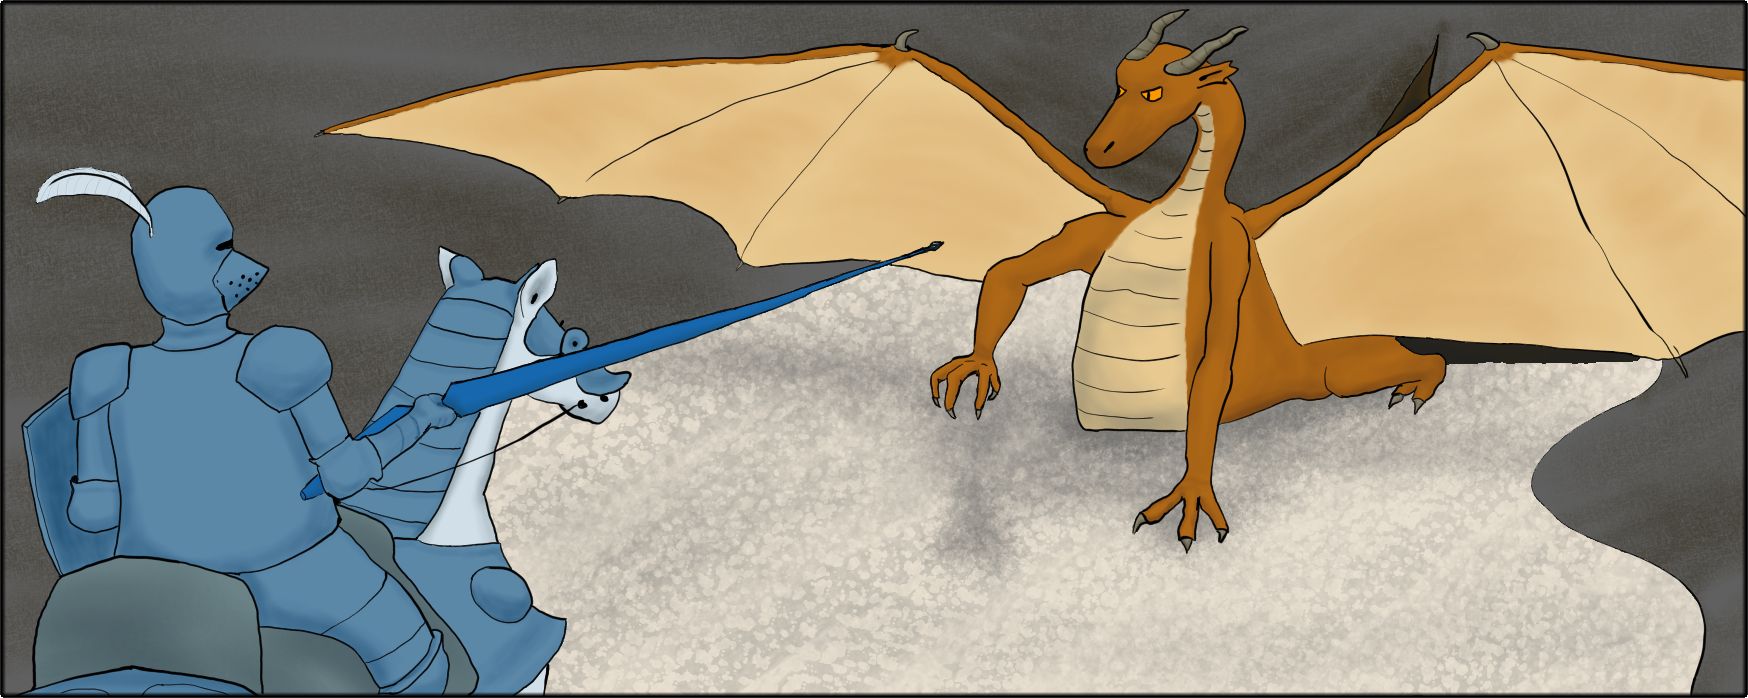 Drawing of a knight charging a dragon